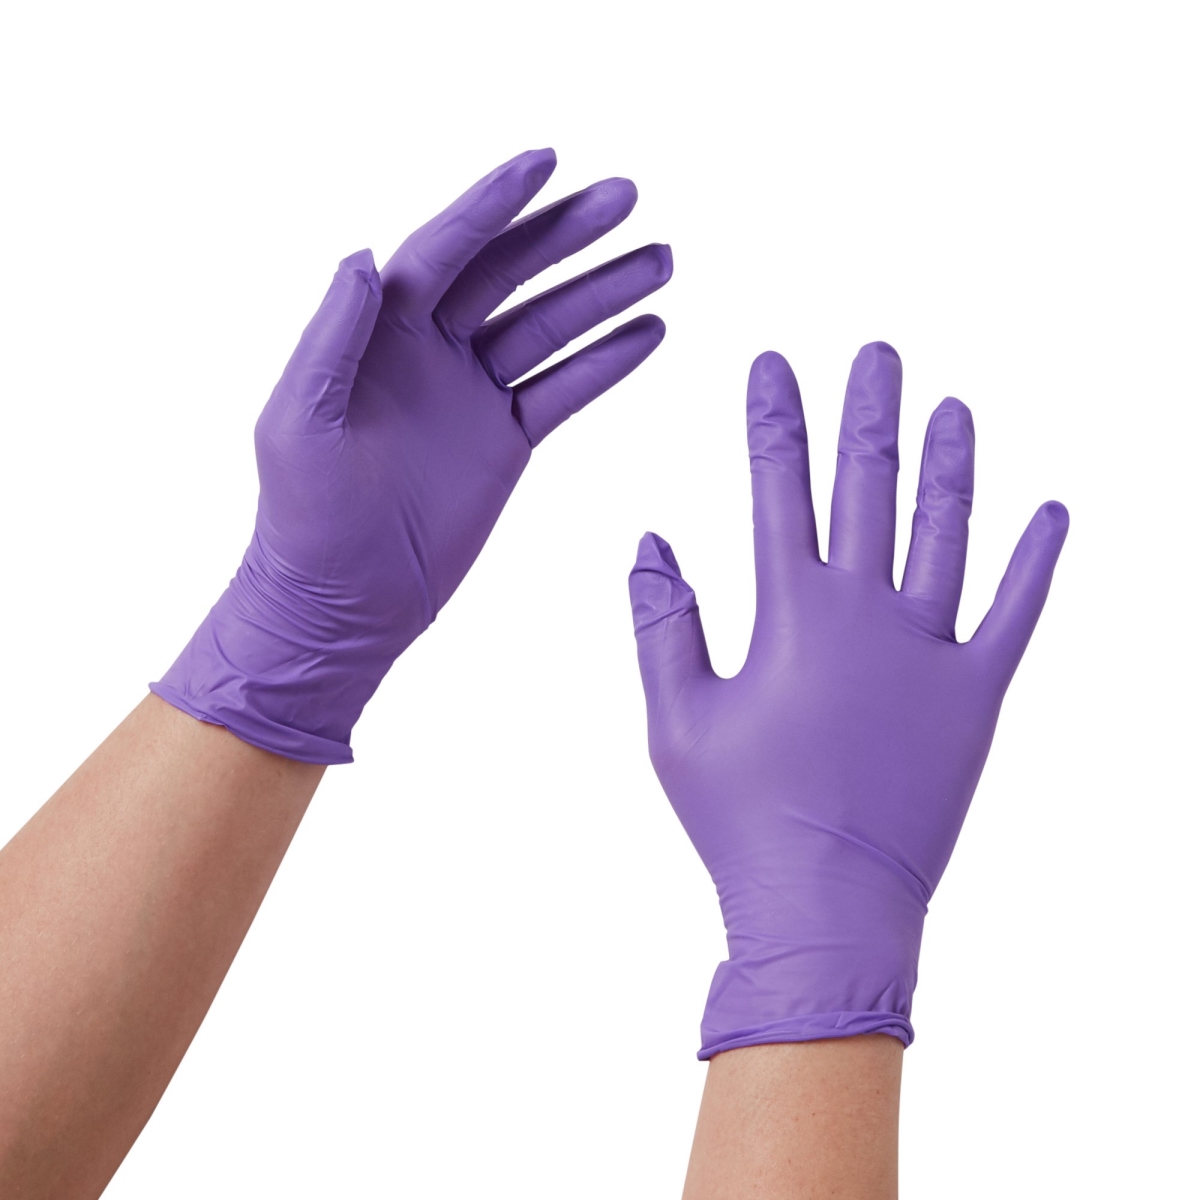 55841300 Purple 9.5 in. Extra Large Nitrile Exam Glove, Pack of 90 -  O & M HALYARD, 365063_BX